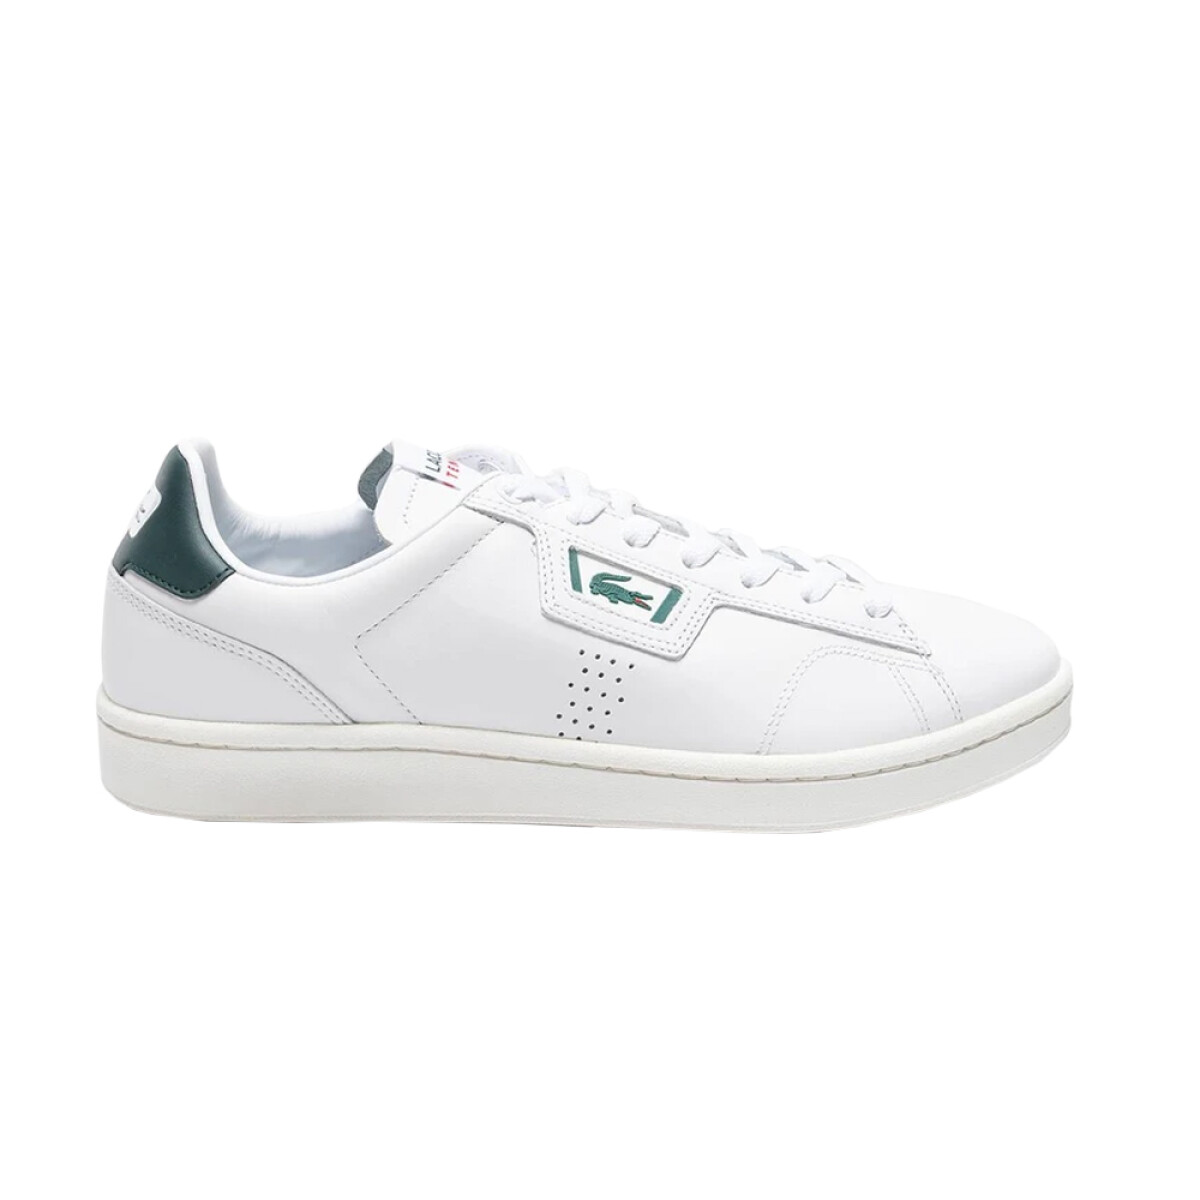 MASTERS CLASSIC 07211 - White/Green 